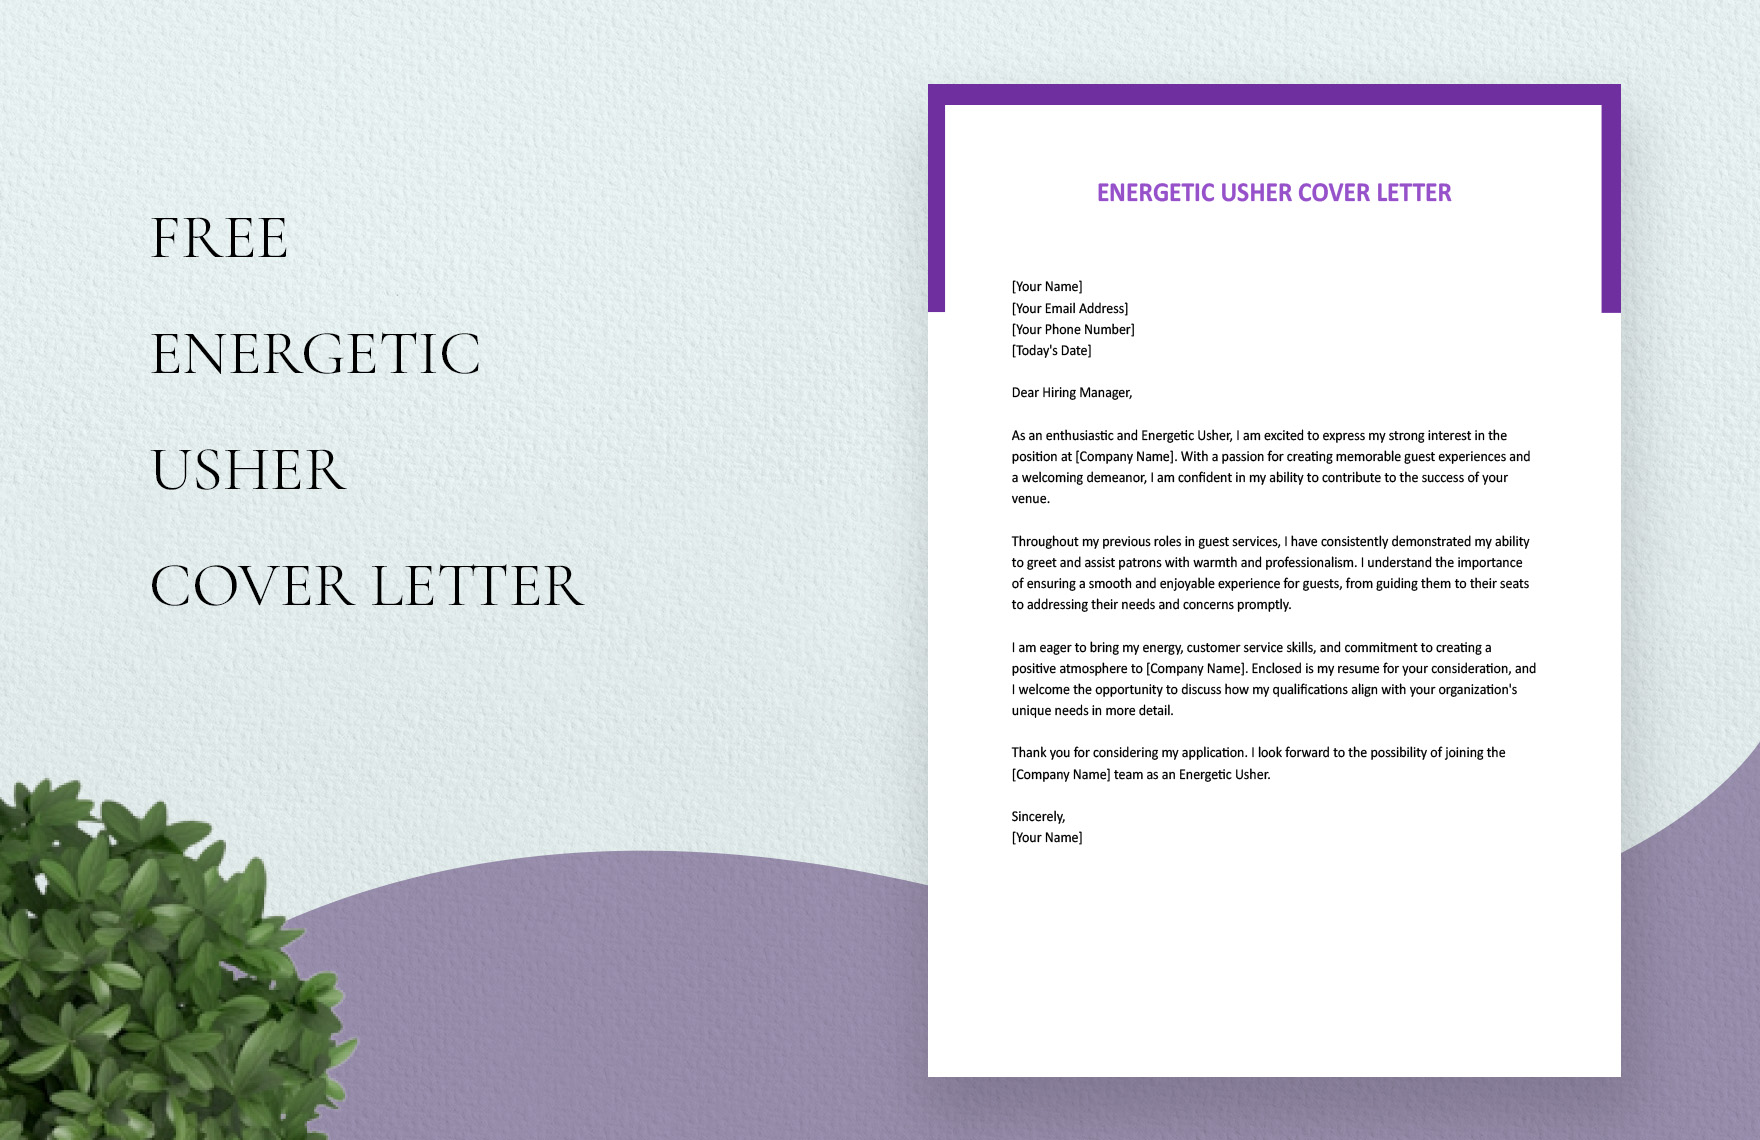 Energetic Usher Cover Letter